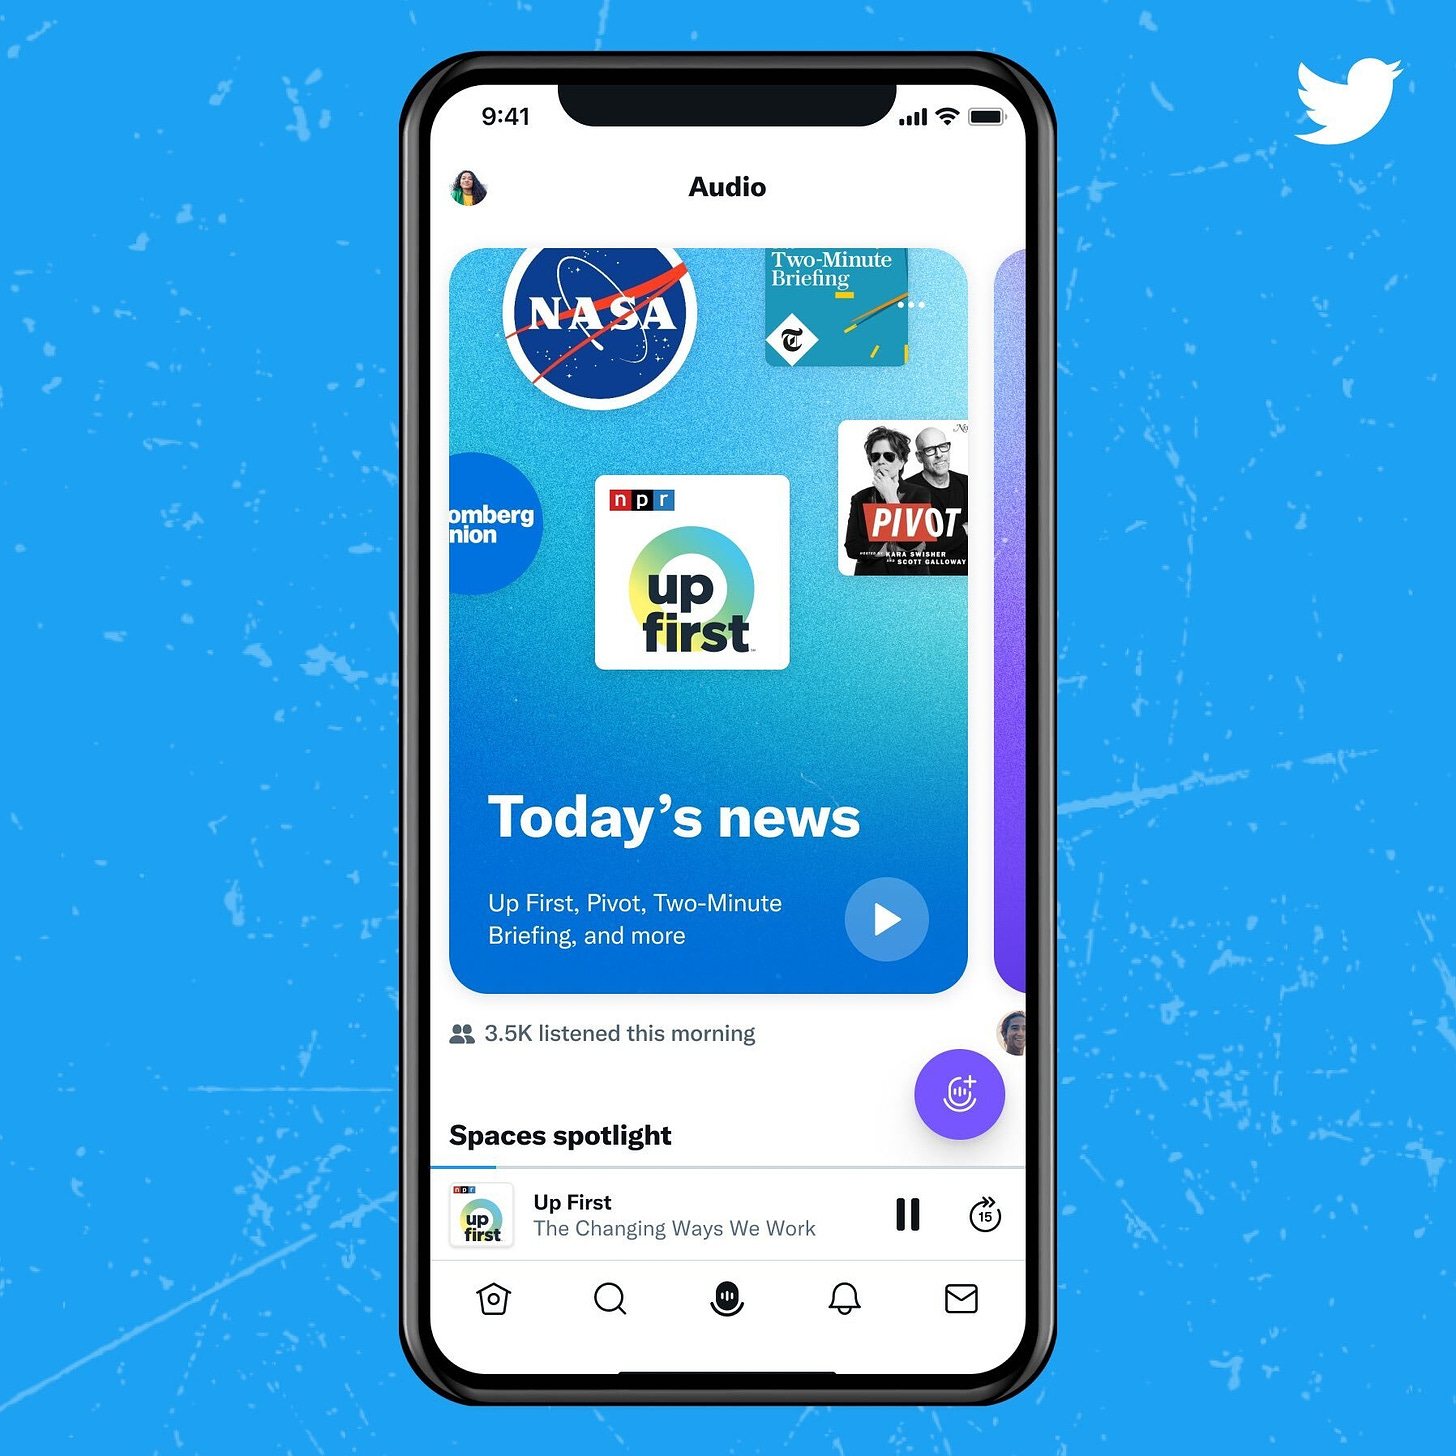 Listen up: Podcasts are coming to Twitter